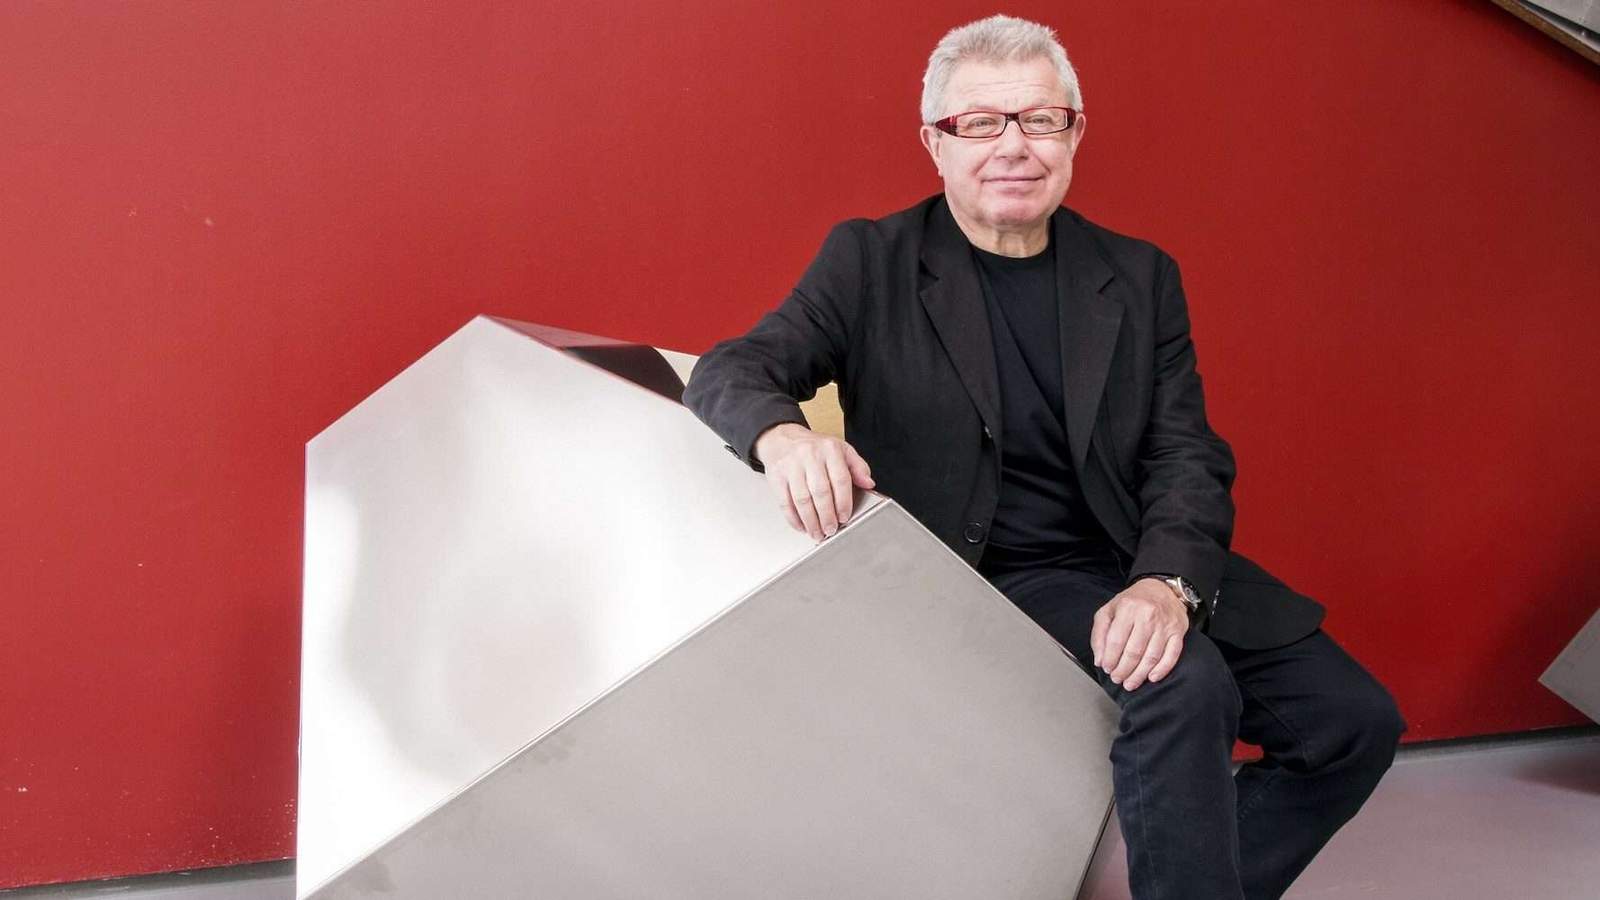 Daniel Libeskind First Architect Awarded the Dresden International Peace Prize